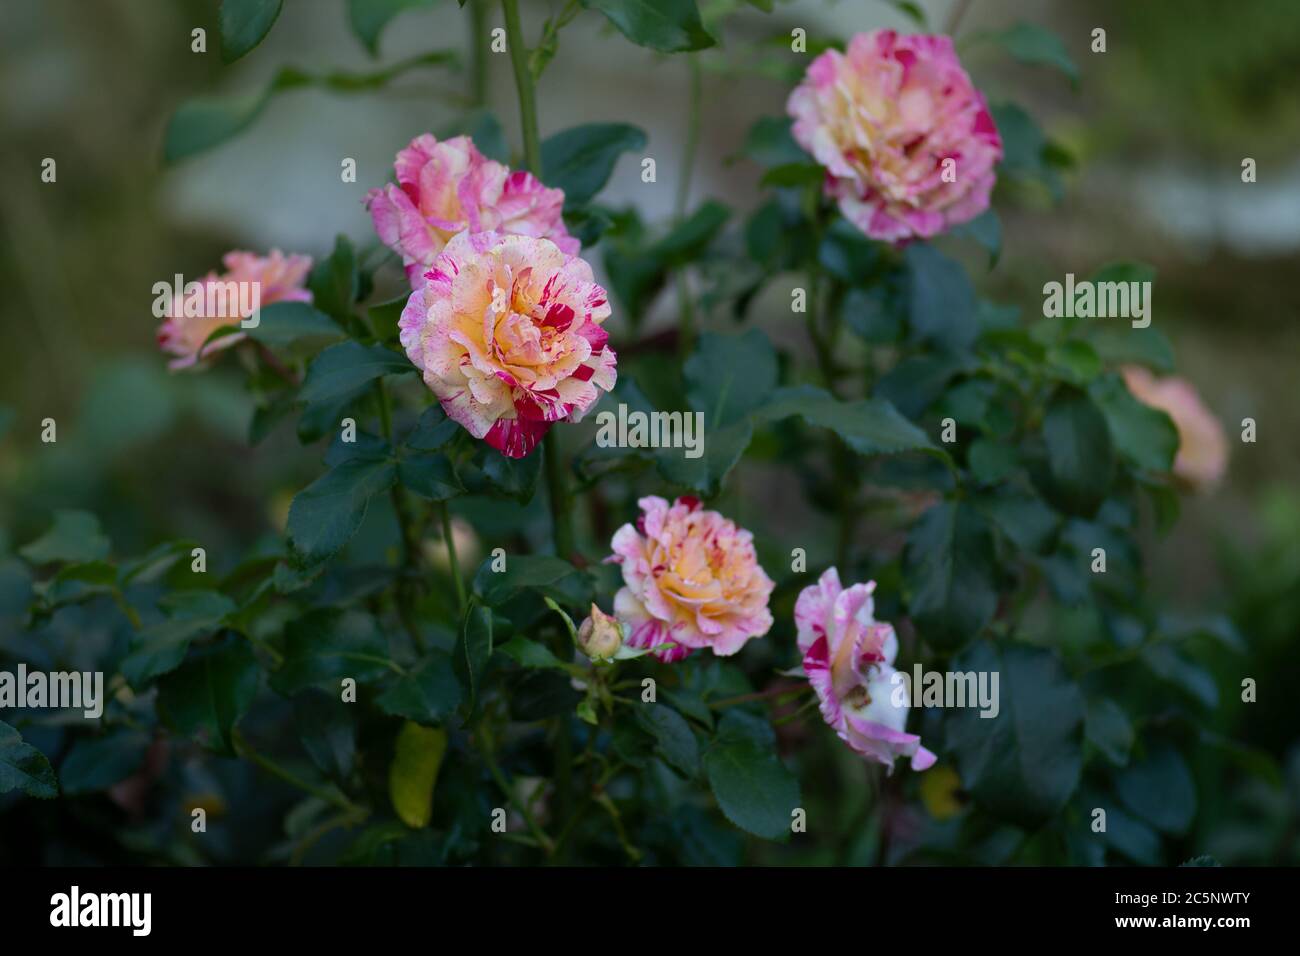 Colorful bush of  Camille Pissarro roses in the garden. Beautiful pink and yellow striped rose Stock Photo